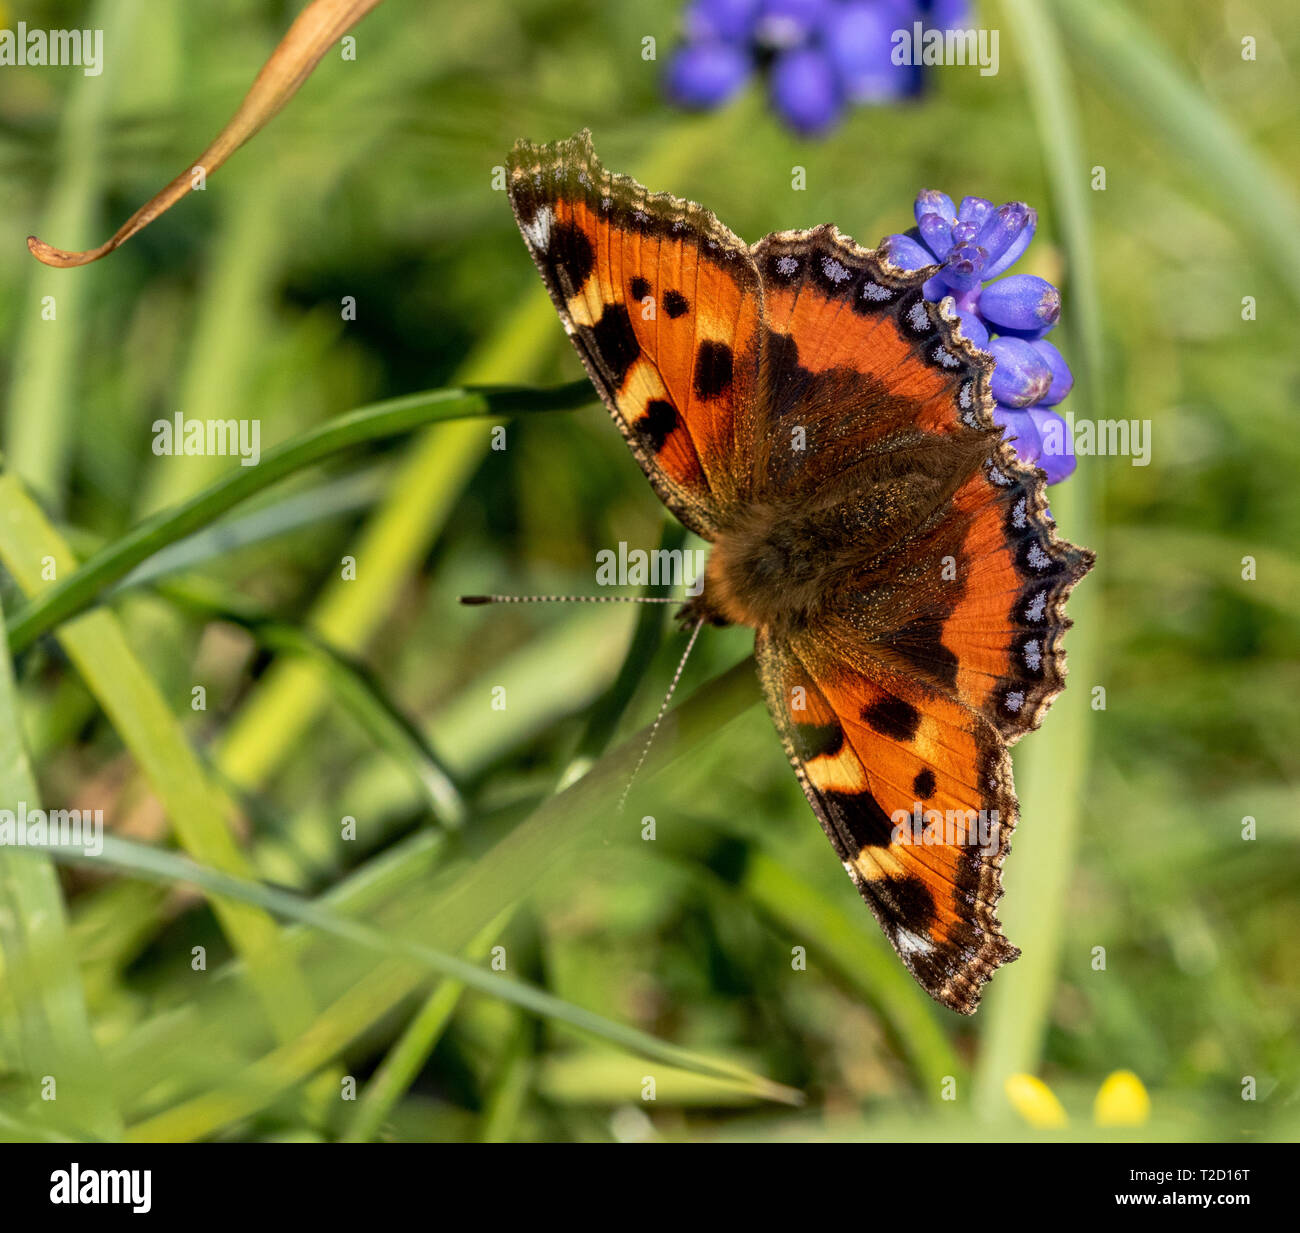 A small tortoiseshell butterfly feeding on nectar from a grape hyacinth flower. Stock Photo